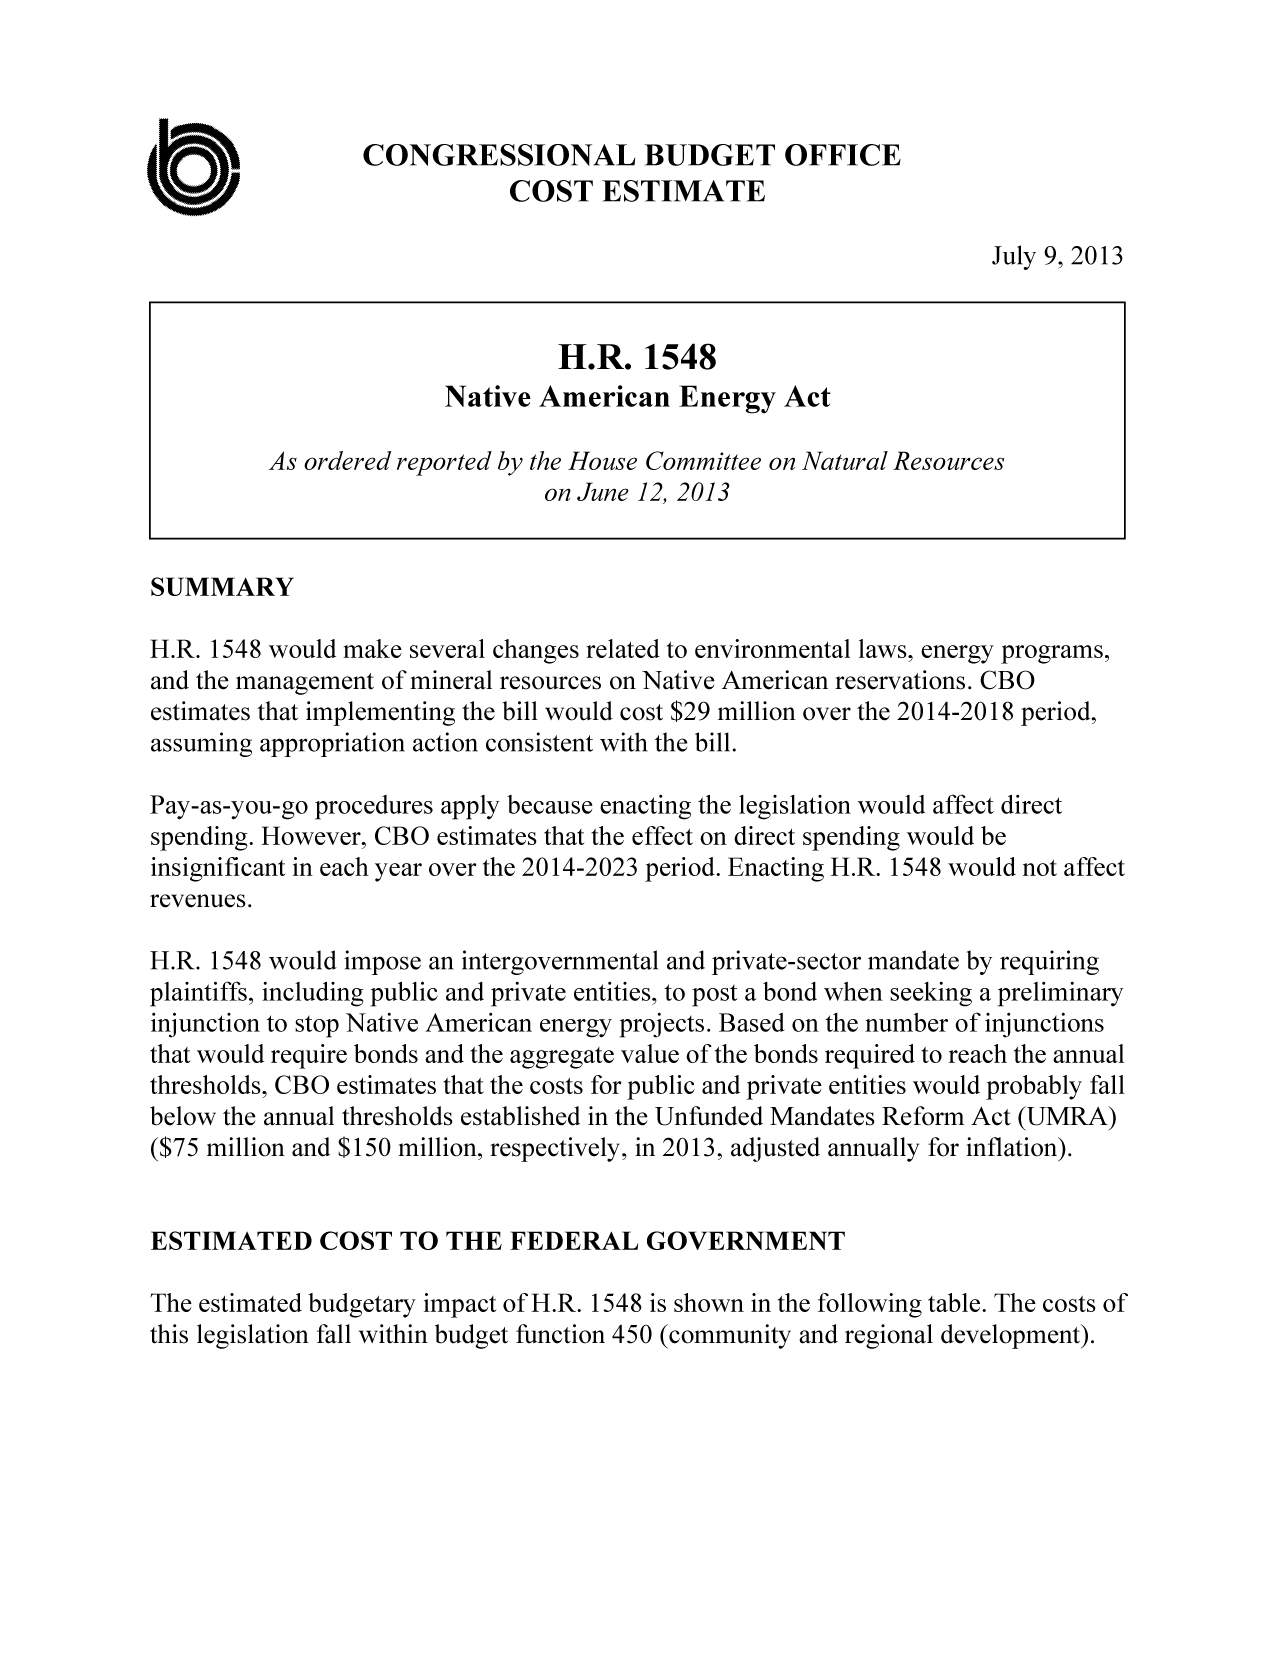 handle is hein.congrec/cbo11276 and id is 1 raw text is: CONGRESSIONAL BUDGET OFFICE
COST ESTIMATE
July 9, 2013
H.R. 1548
Native American Energy Act
As ordered reported by the House Committee on Natural Resources
on June 12, 2013
SUMMARY
H.R. 1548 would make several changes related to environmental laws, energy programs,
and the management of mineral resources on Native American reservations. CBO
estimates that implementing the bill would cost $29 million over the 2014-2018 period,
assuming appropriation action consistent with the bill.
Pay-as-you-go procedures apply because enacting the legislation would affect direct
spending. However, CBO estimates that the effect on direct spending would be
insignificant in each year over the 2014-2023 period. Enacting H.R. 1548 would not affect
revenues.
H.R. 1548 would impose an intergovernmental and private-sector mandate by requiring
plaintiffs, including public and private entities, to post a bond when seeking a preliminary
injunction to stop Native American energy projects. Based on the number of injunctions
that would require bonds and the aggregate value of the bonds required to reach the annual
thresholds, CBO estimates that the costs for public and private entities would probably fall
below the annual thresholds established in the Unfunded Mandates Reform Act (UMRA)
($75 million and $150 million, respectively, in 2013, adjusted annually for inflation).
ESTIMATED COST TO THE FEDERAL GOVERNMENT
The estimated budgetary impact of H.R. 1548 is shown in the following table. The costs of
this legislation fall within budget function 450 (community and regional development).


